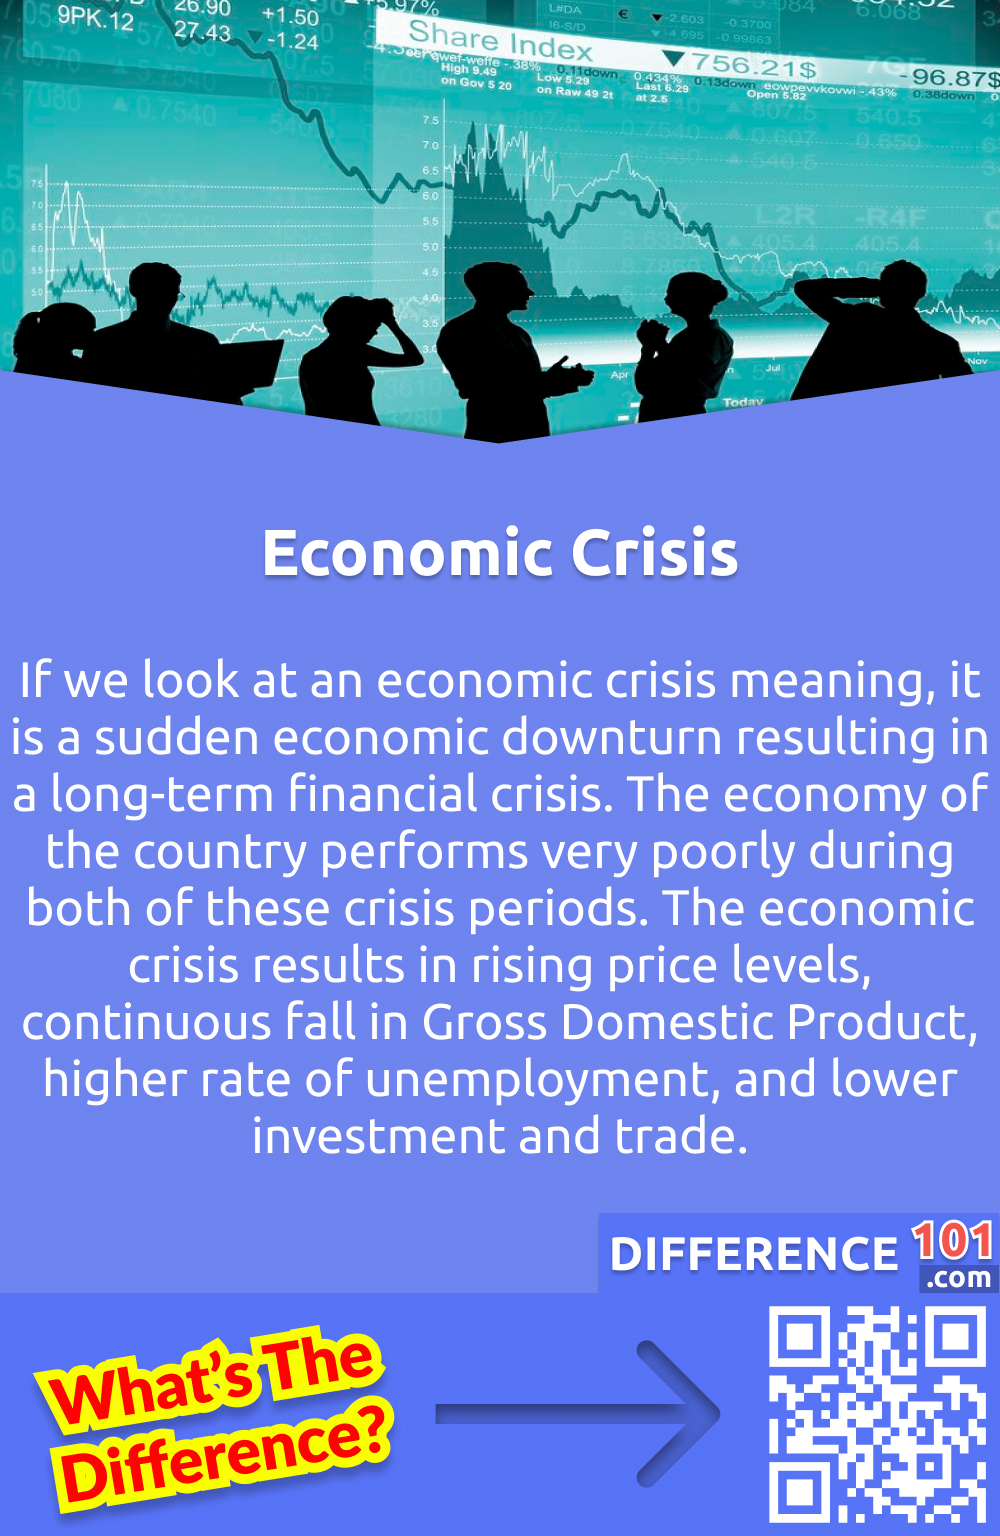 What Is A Economic Crisis? If we look at an economic crisis meaning, it is a sudden economic downturn resulting in a long-term financial crisis. The economy of the country performs very poorly during both of these crisis periods. The economic crisis results in rising price levels, continuous fall in Gross Domestic Product, higher rate of unemployment, and lower investment and trade. Various factors like an asset-liability mismatch of financial institutions, an unexpected decline of values of securities and stock, and frauds like mismanagement of financial funds at large scale contribute to causing an economic crisis. The economic crisis had a severe effect on the general public. Because it increases the unemployment rate, which negatively impacts living conditions. Moreover, the downturn in the performance of financial institutes has a severe impact on the performance of the entire economy.